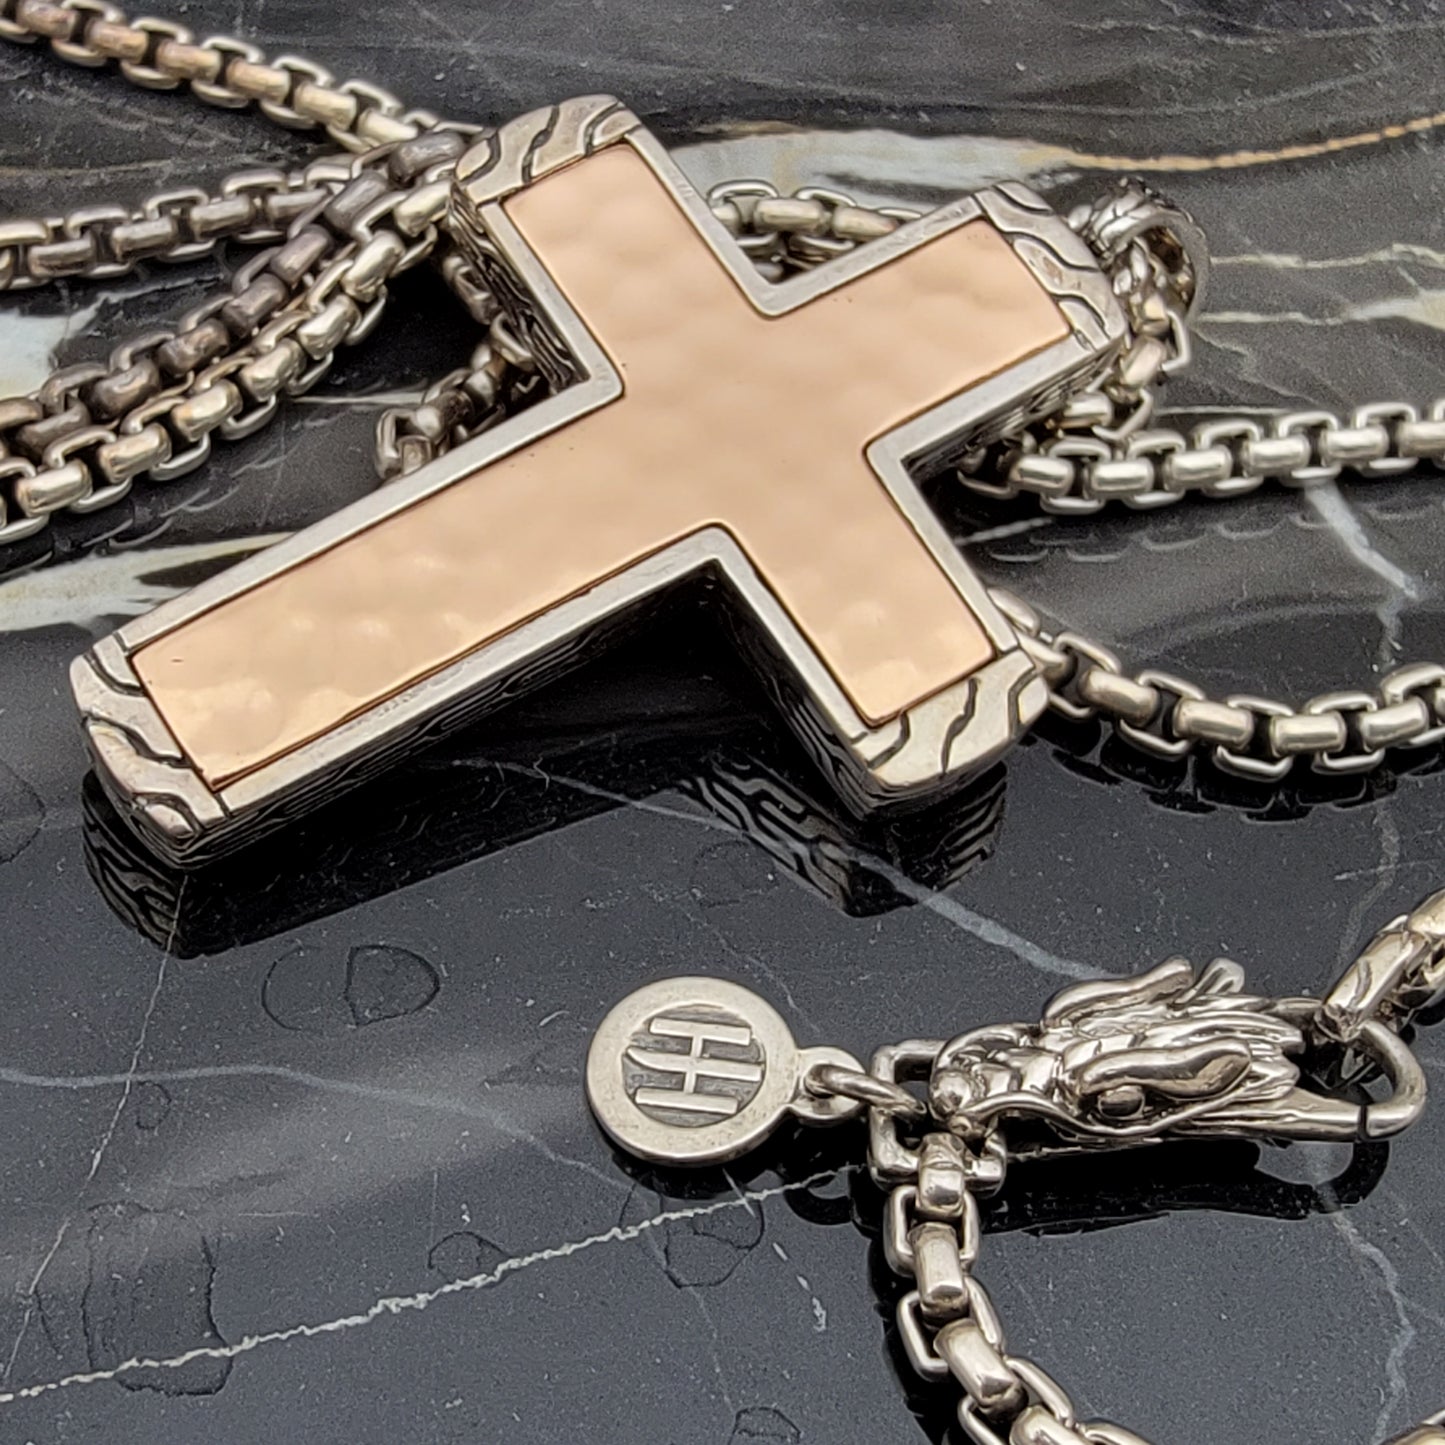 New John Hardy Men's Classic Chain 26" 925 Sterling Silver Necklace Cross and Hammered Bronze